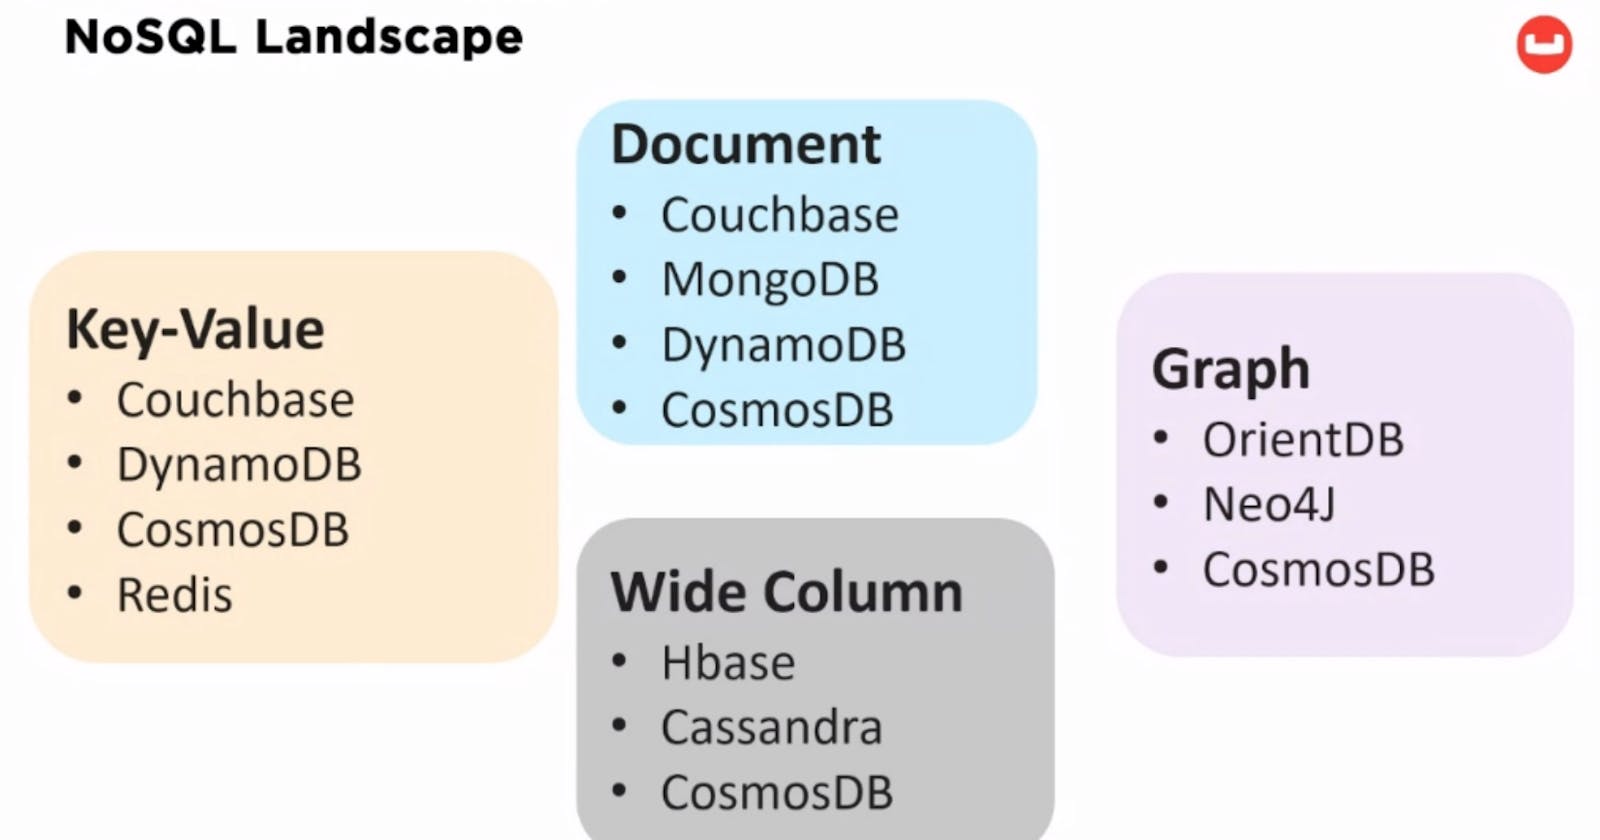 Notes on JSON Modeling for Document Databases